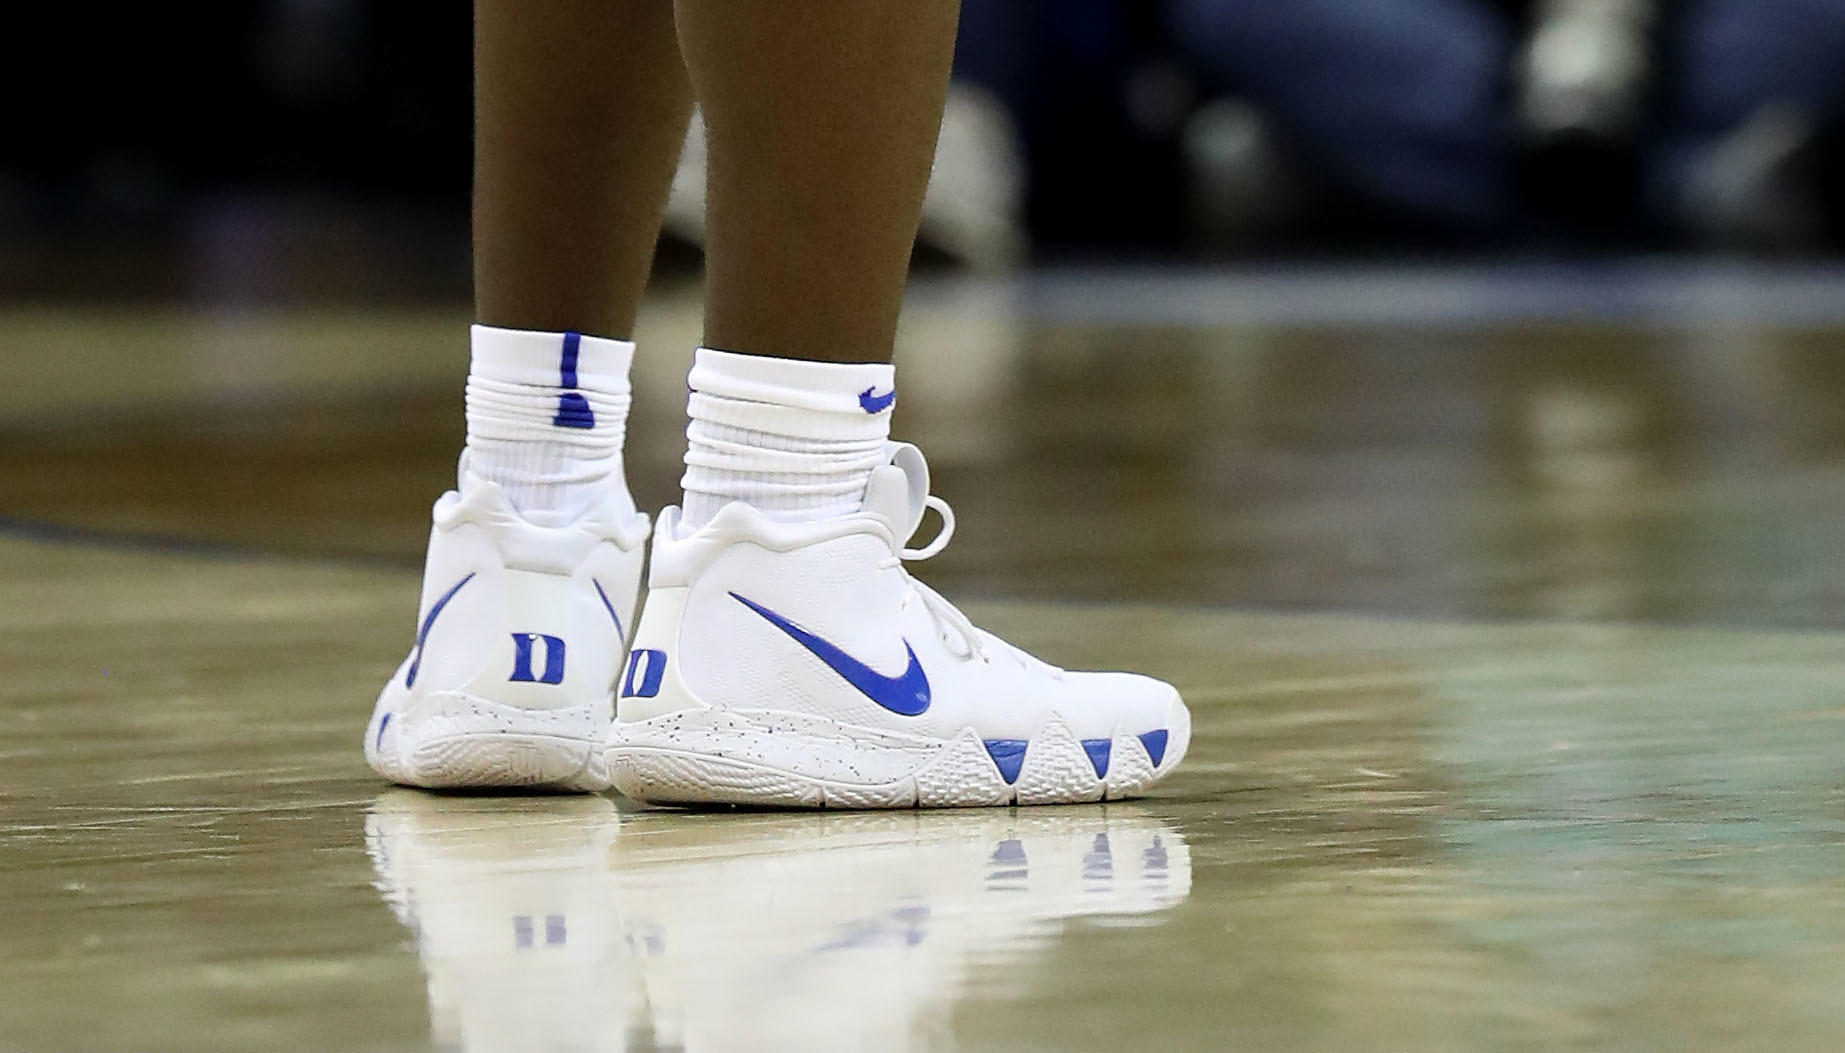 Nike sent a team to China to fix Zion Williamson's sneakers - Chicago Tribune1845 x 1053